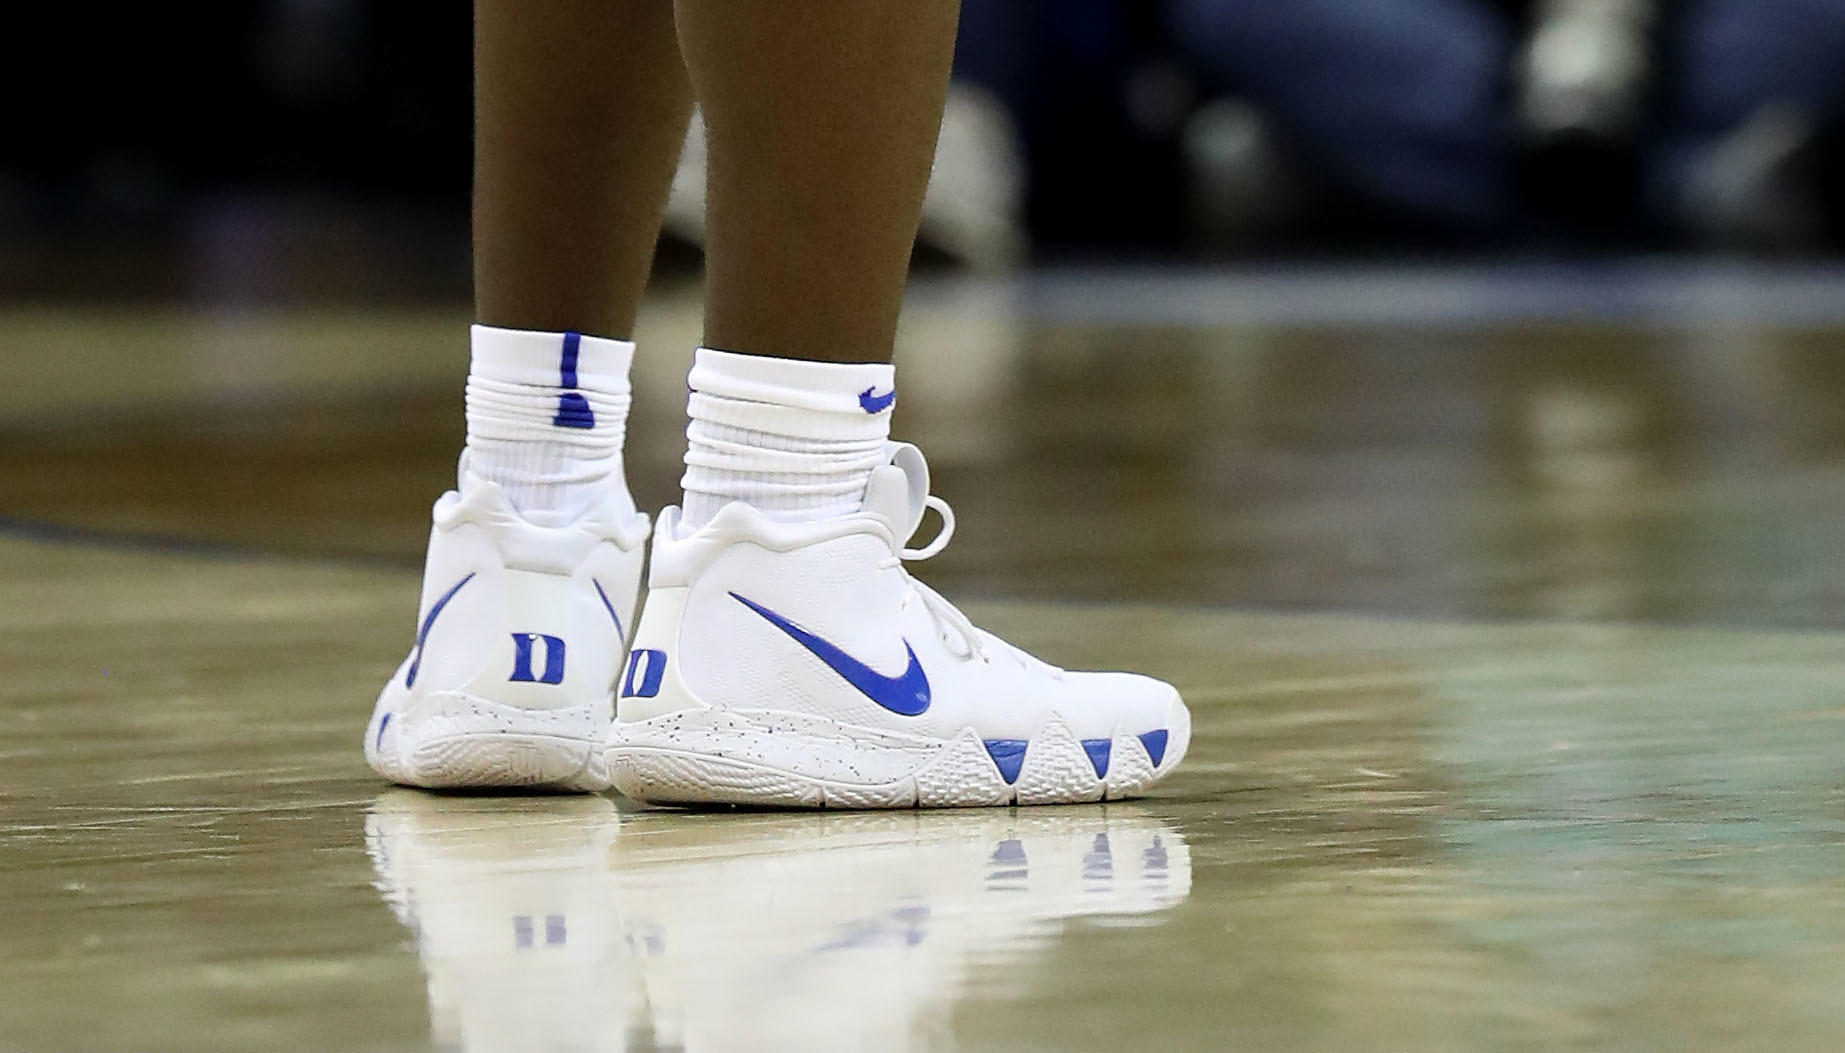 Nike sent a team to China to fix Zion Williamson's sneakers - Chicago Tribune1845 x 1053